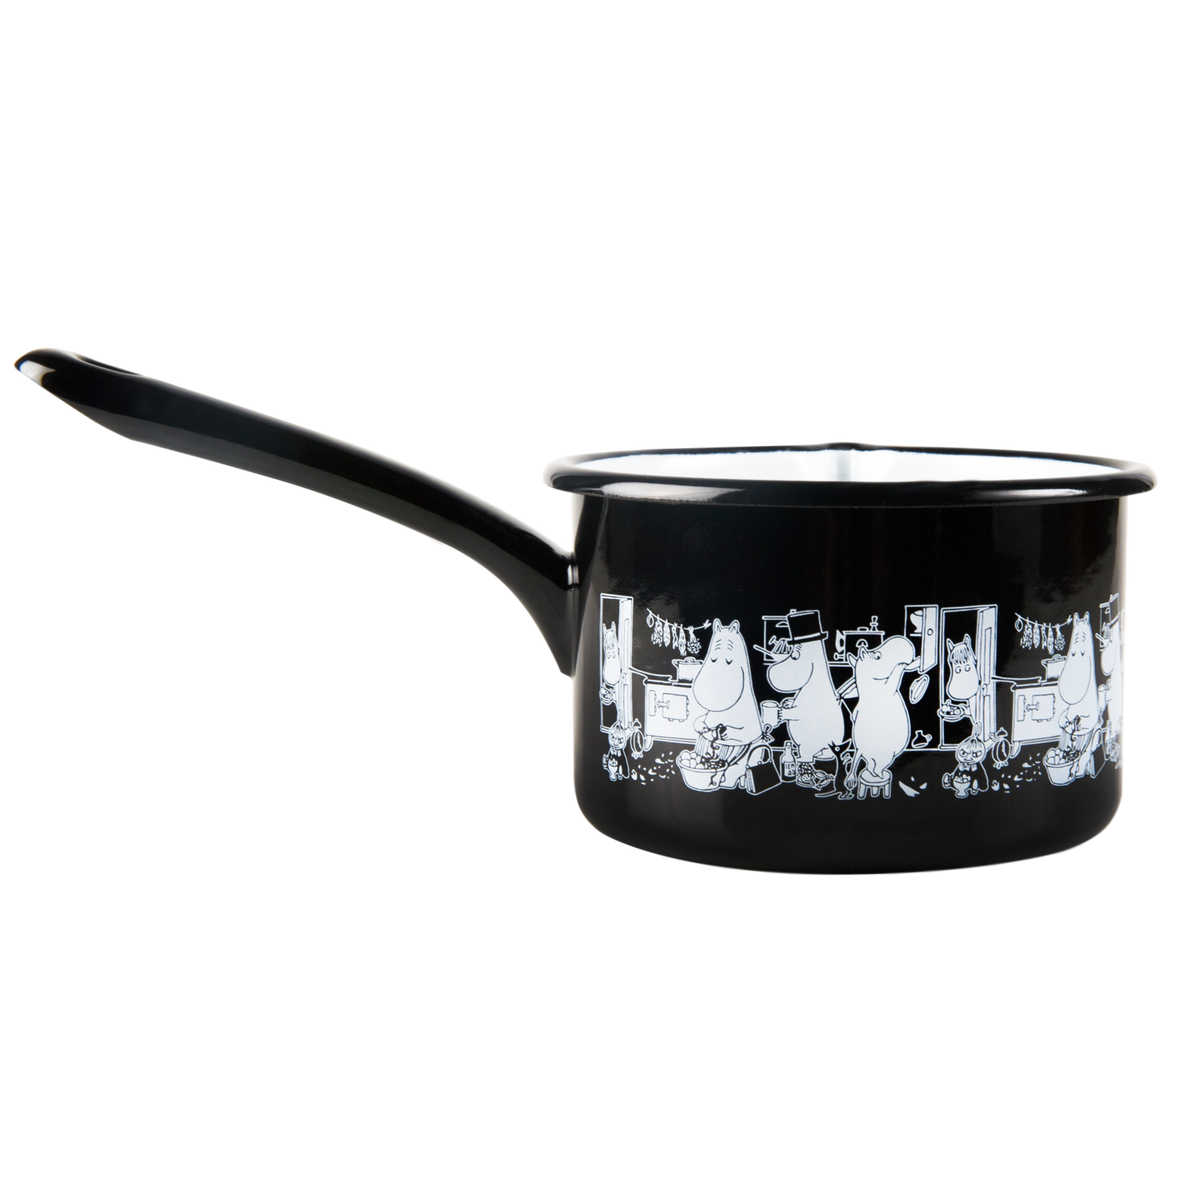 Moomin In The Kitchen Enamel Cookware Collection by Muurla Design 